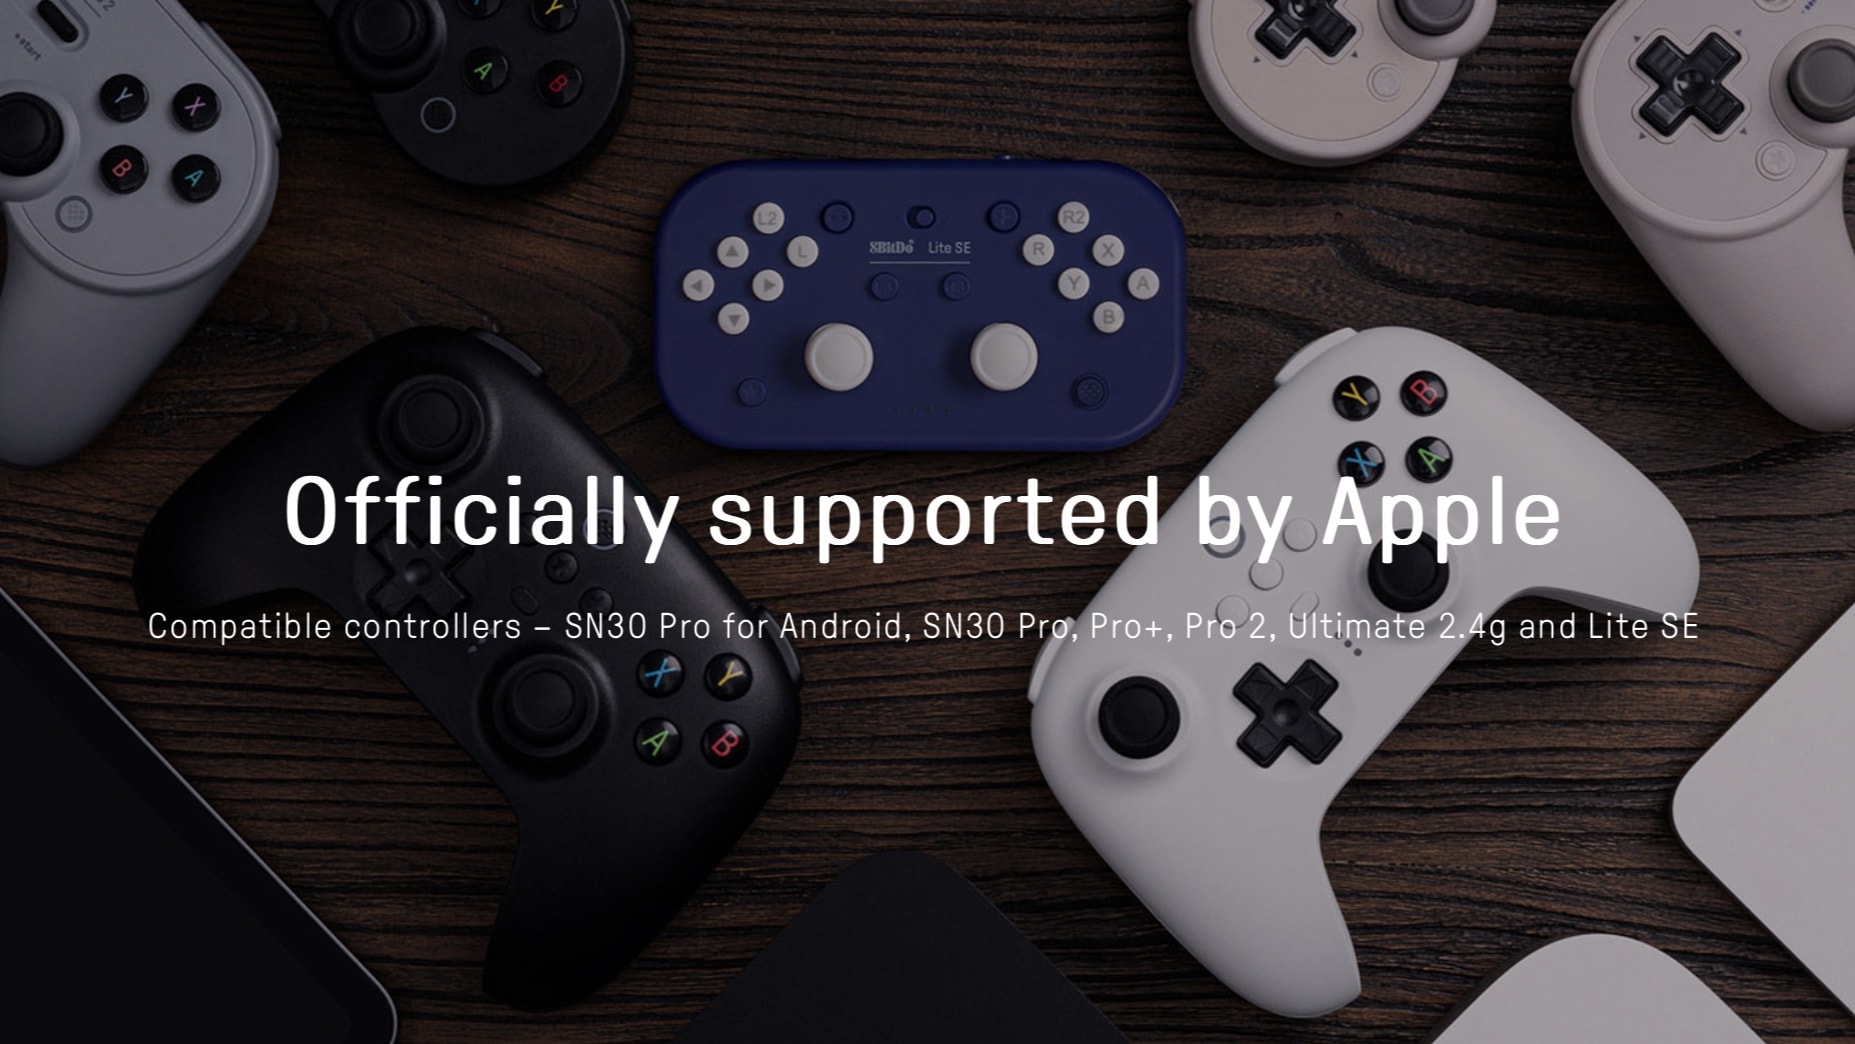 Cool 8BitDo game controllers now support Apple devices